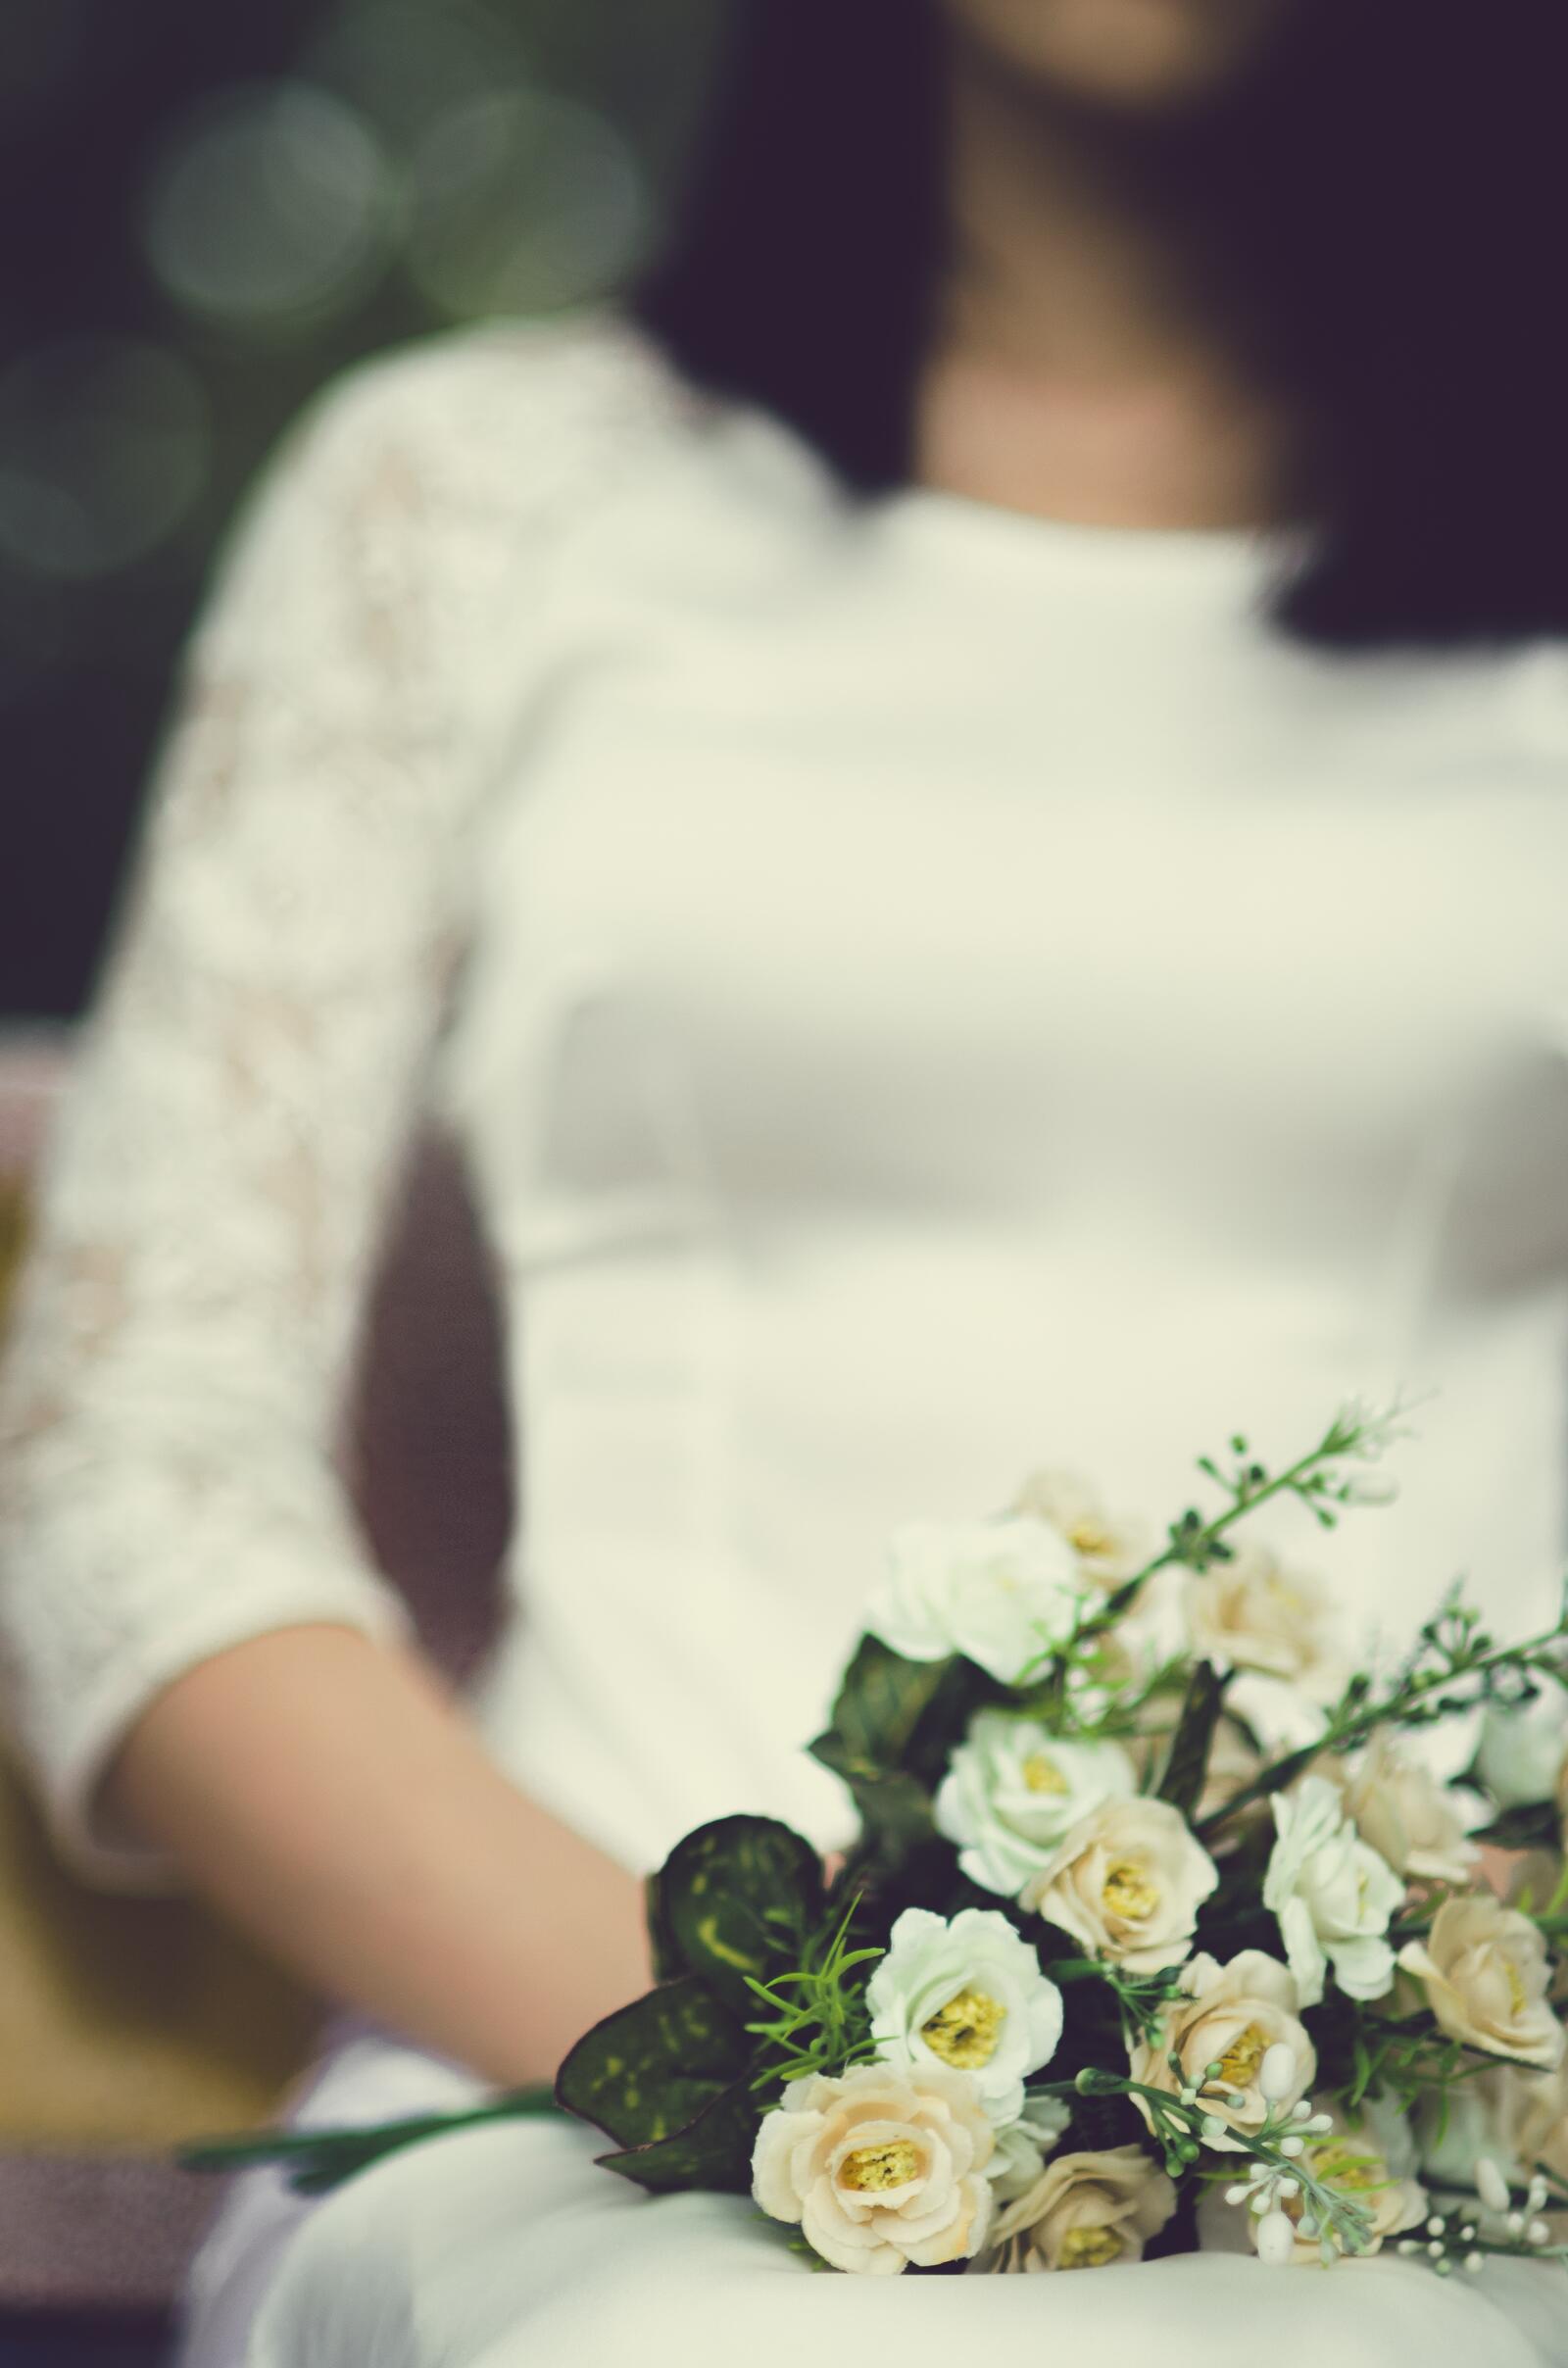 Free photo Girl in a wedding dress with a bouquet of flowers